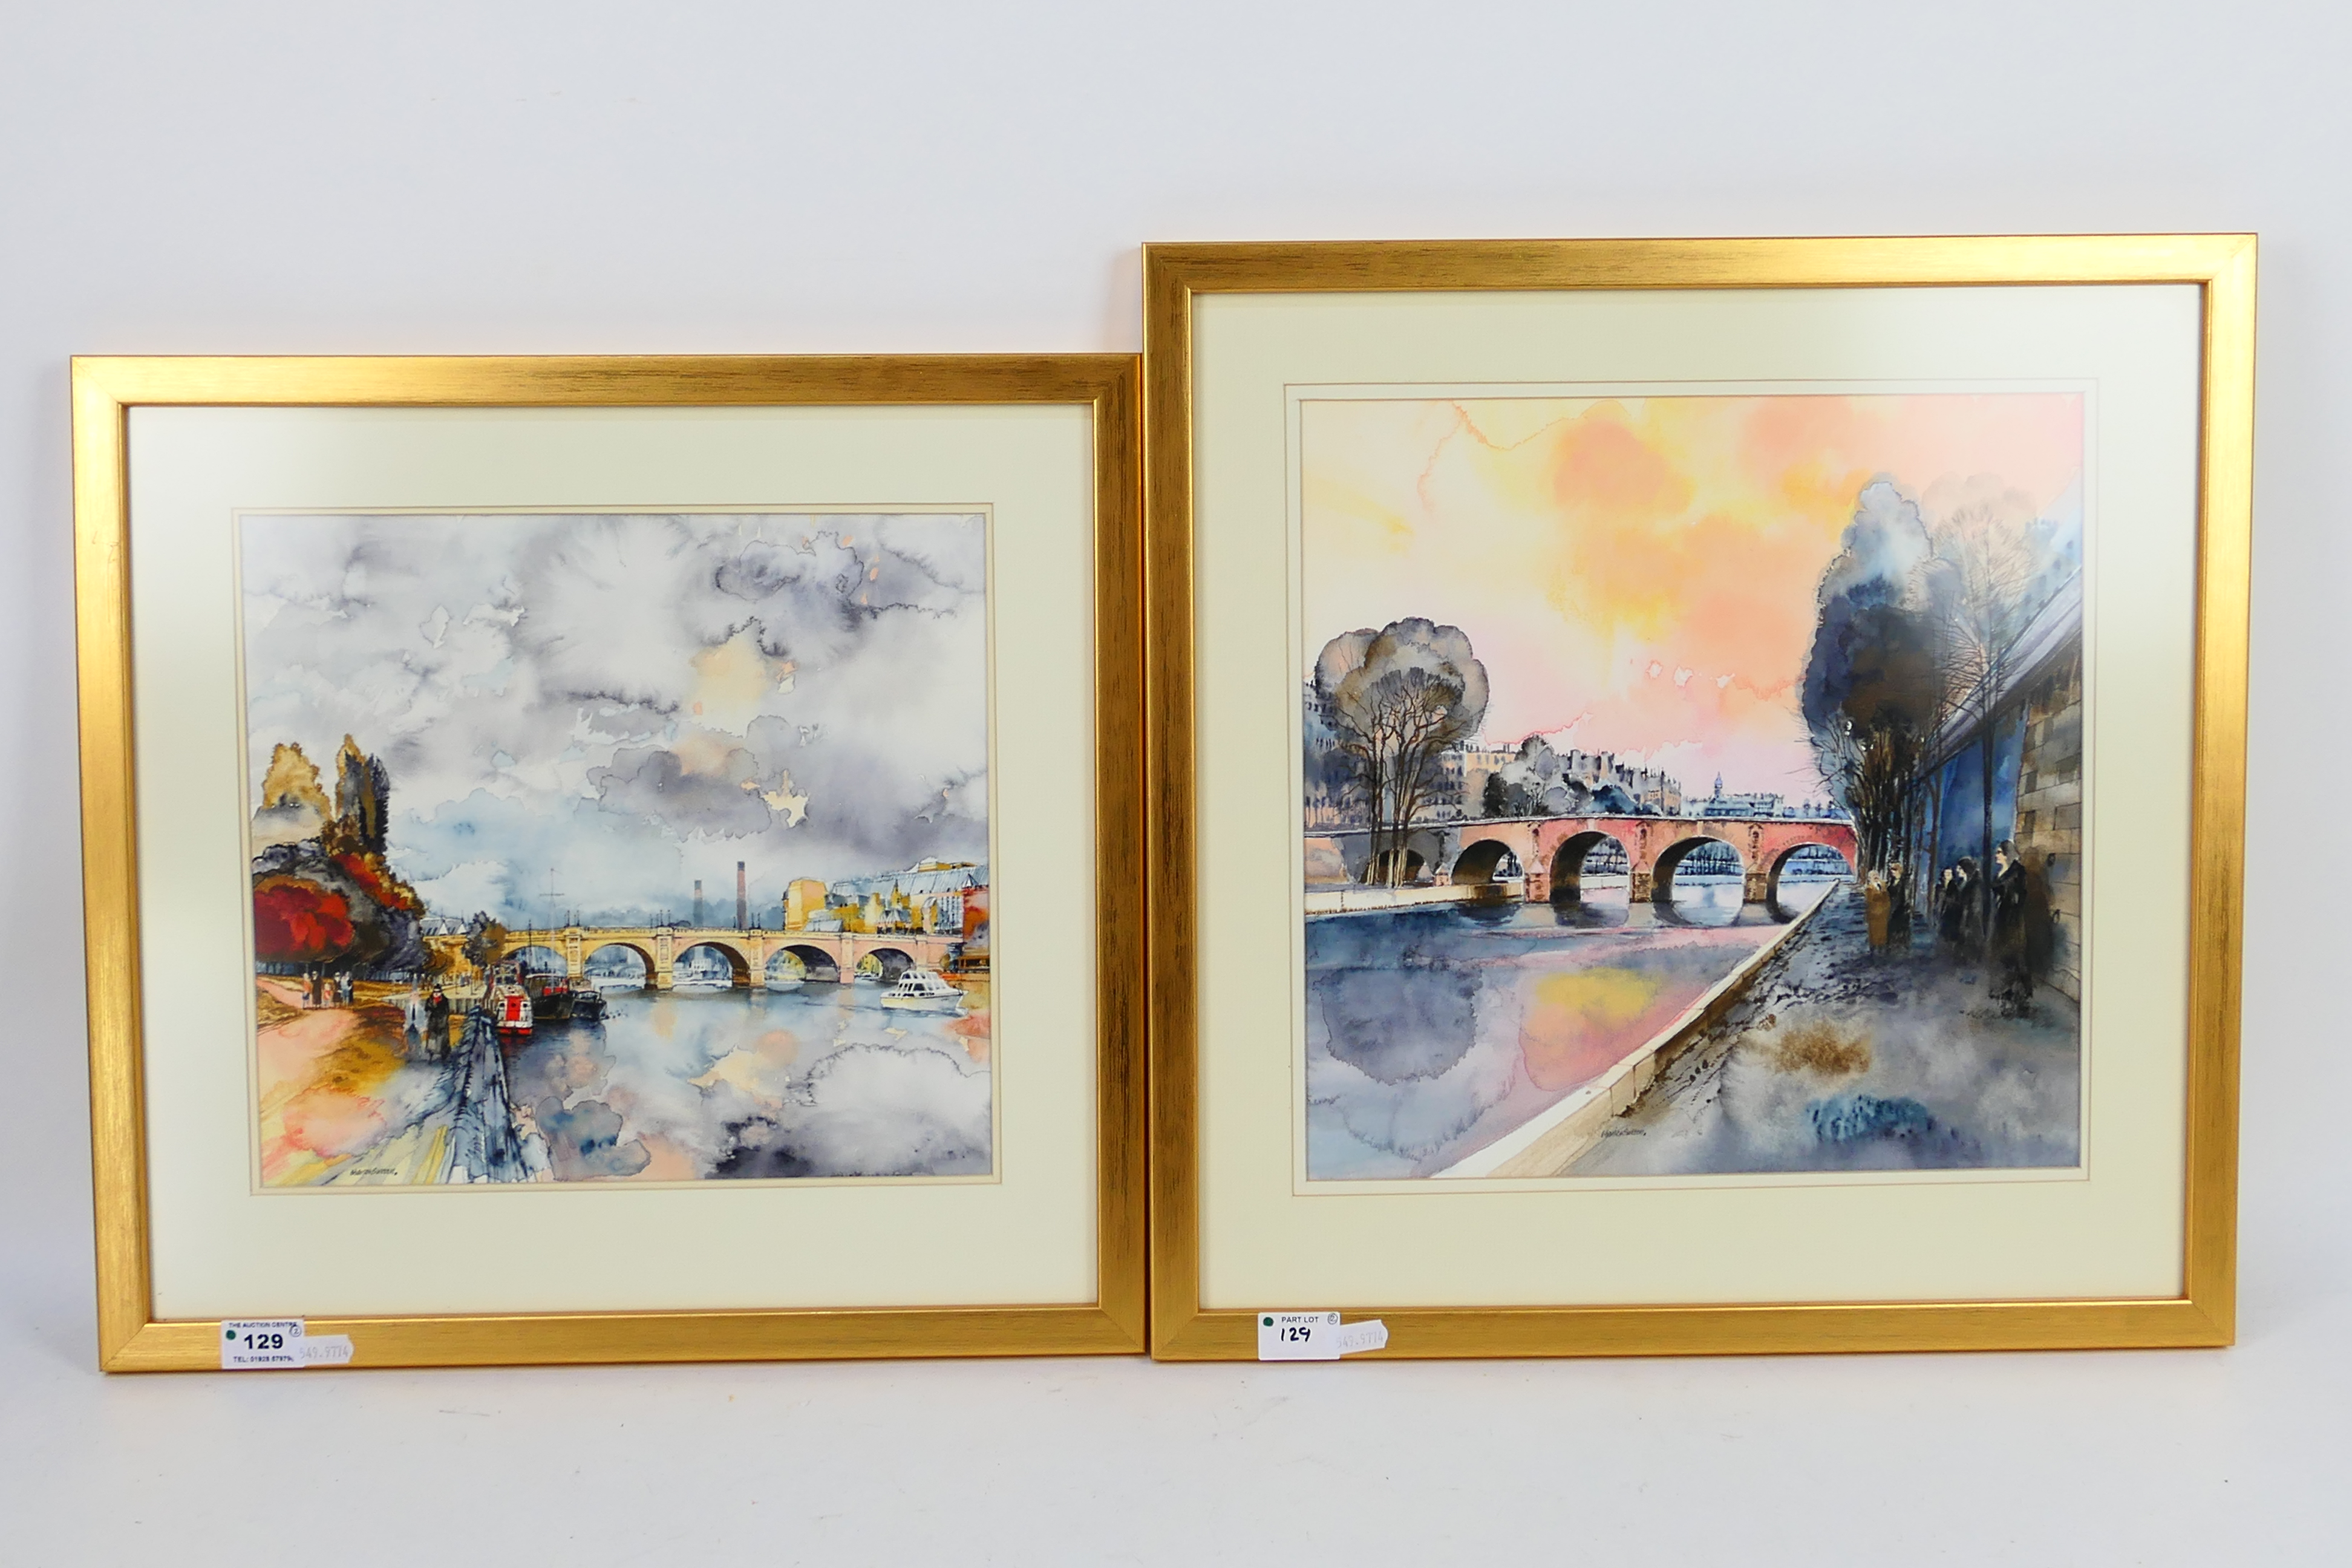 Two watercolour and ink riverside landscape scenes signed by the artist Charles Sutton,